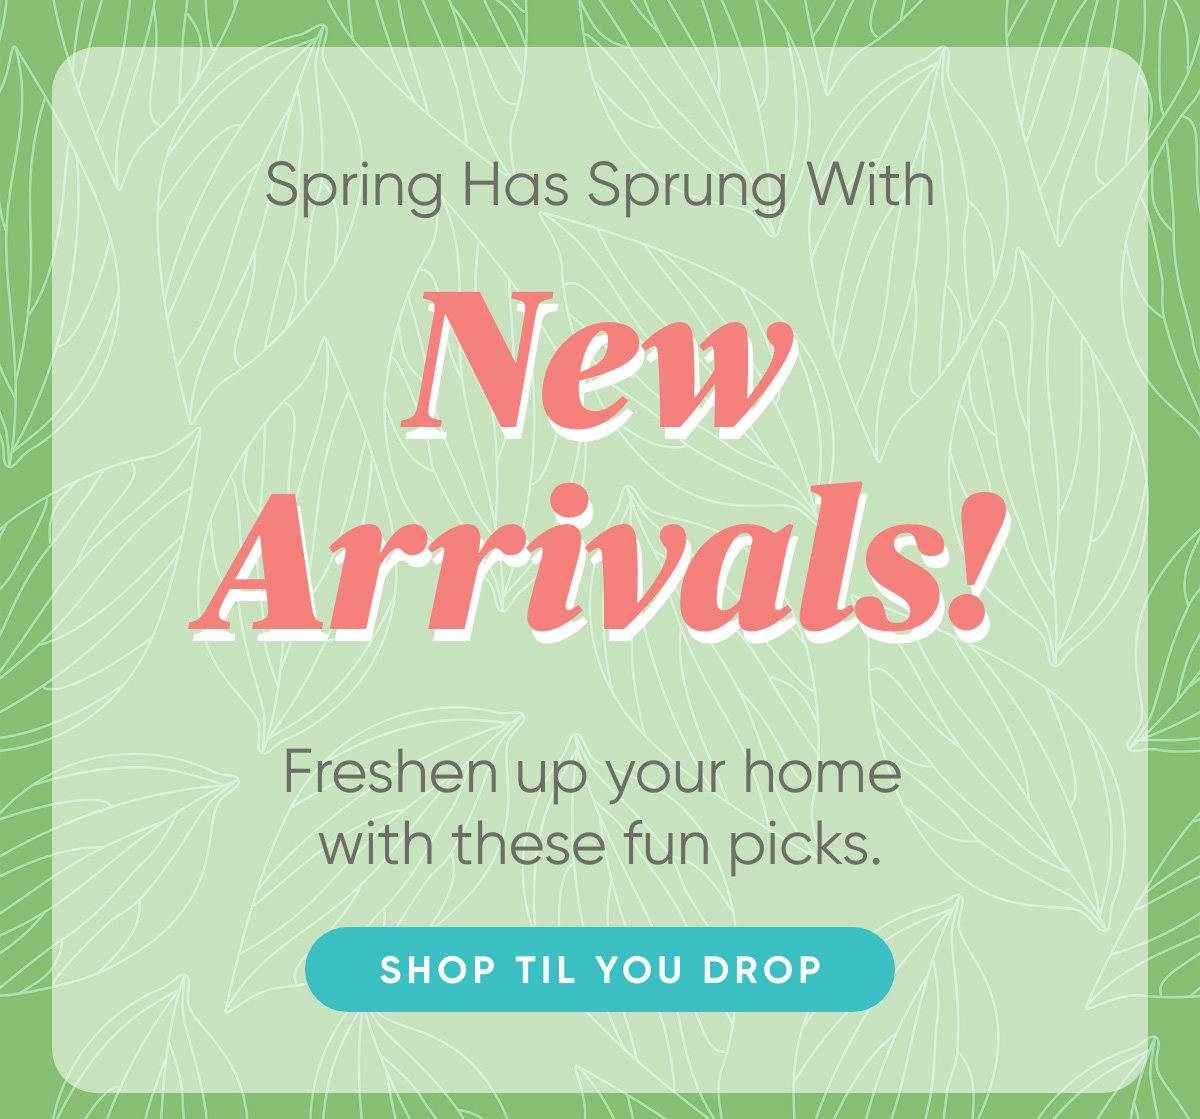 Spring Has Sprung With New Arrivals!  Freshen up your home with these fun picks!  Shop til you drop